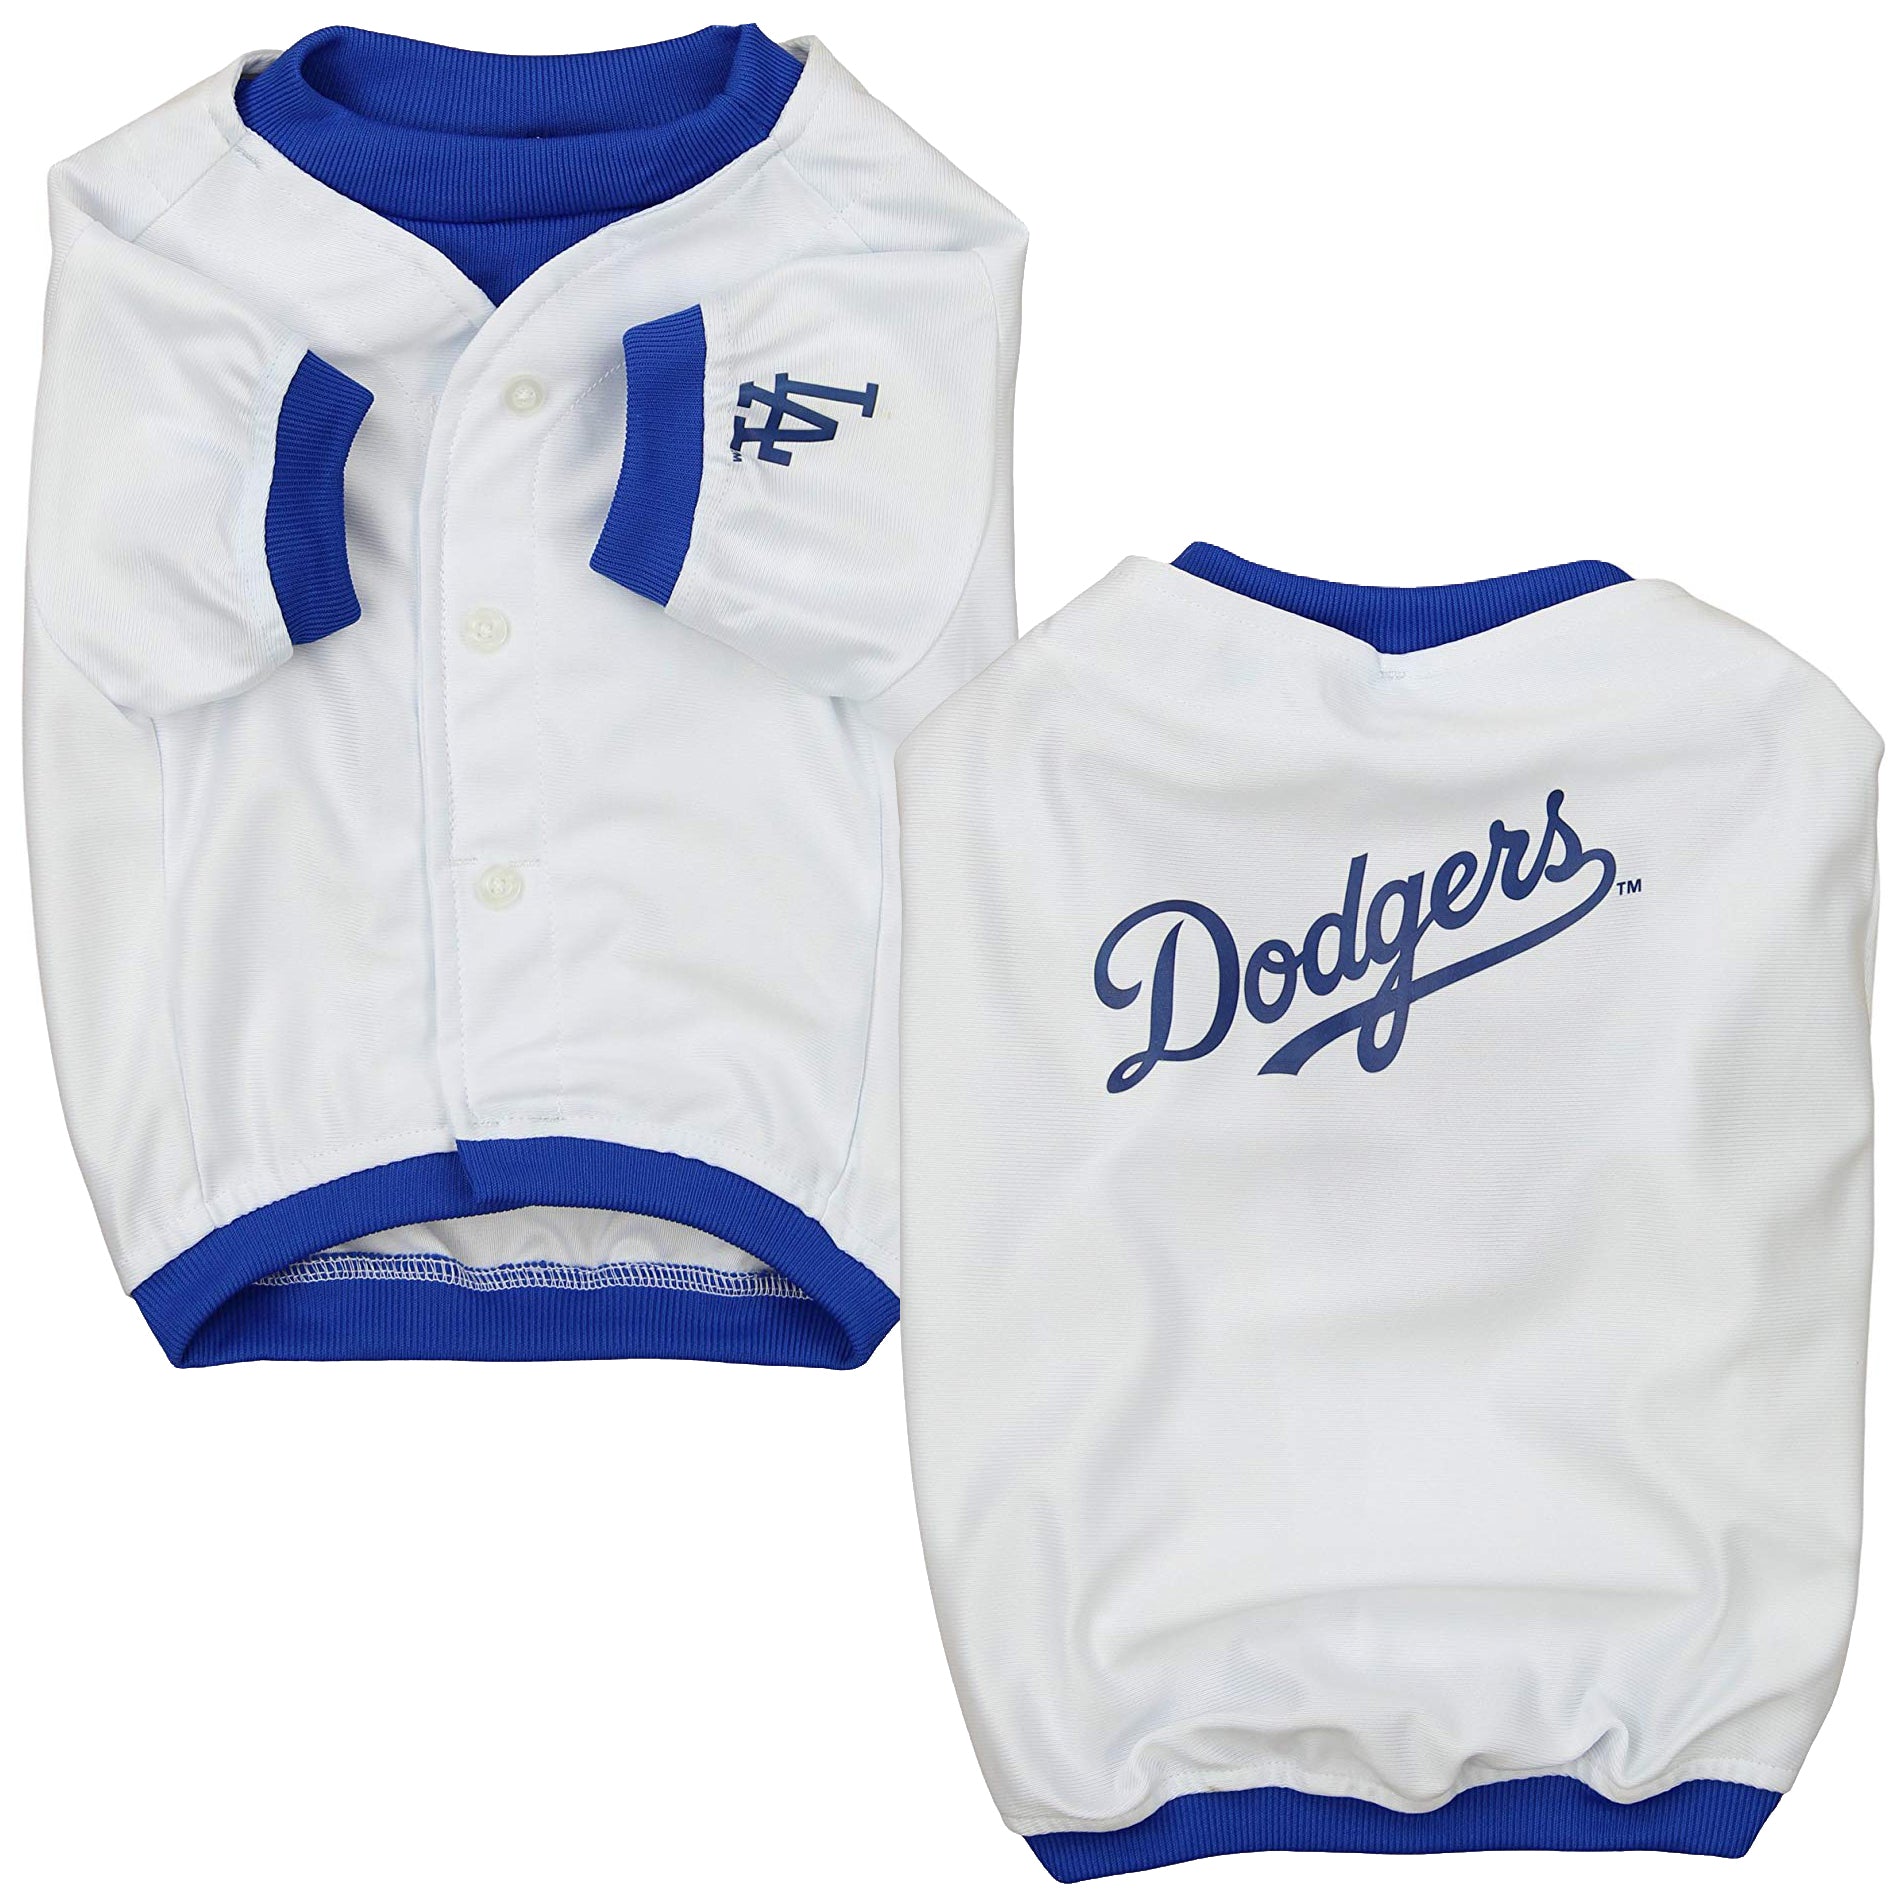 los angeles dodgers toddler jersey